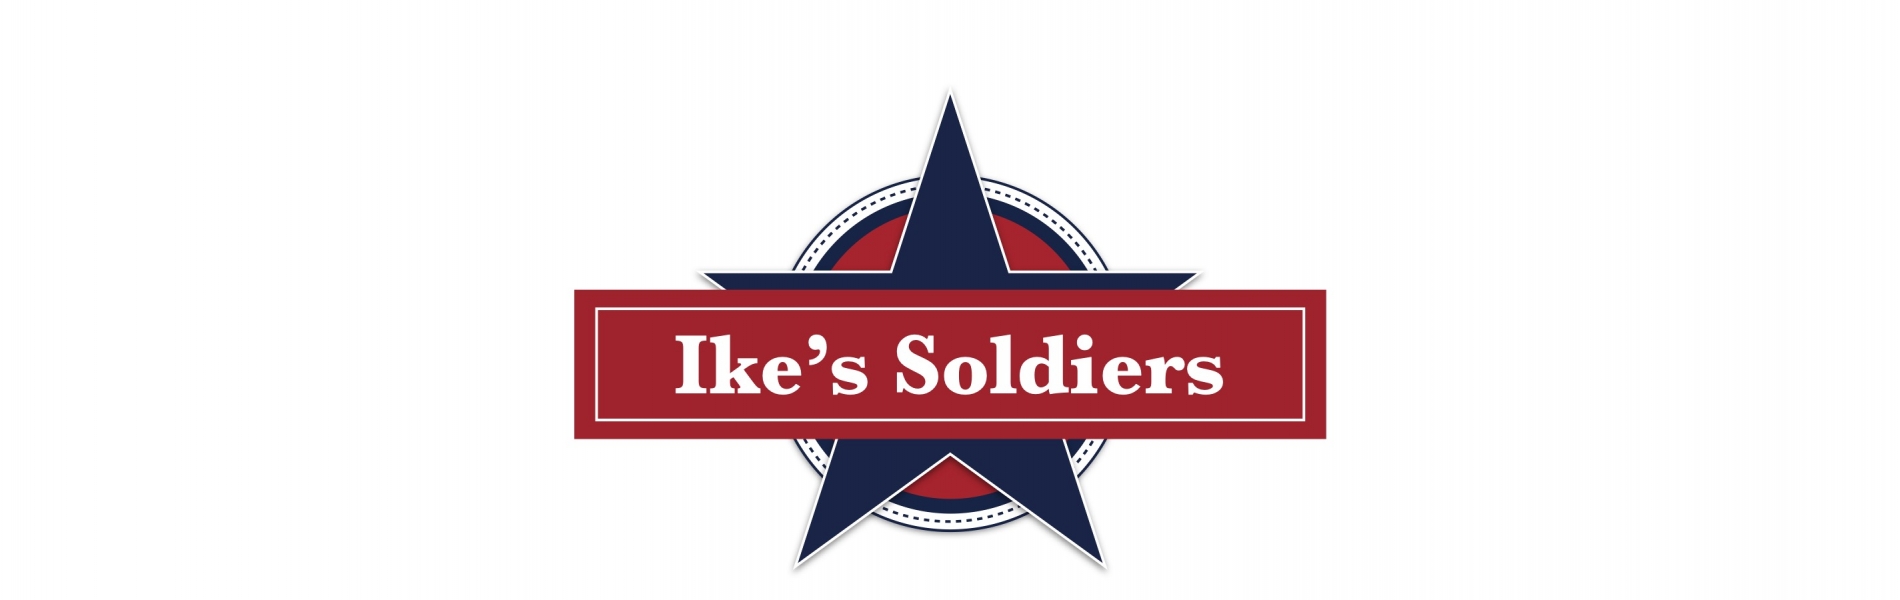 Ike's Soldiers banner